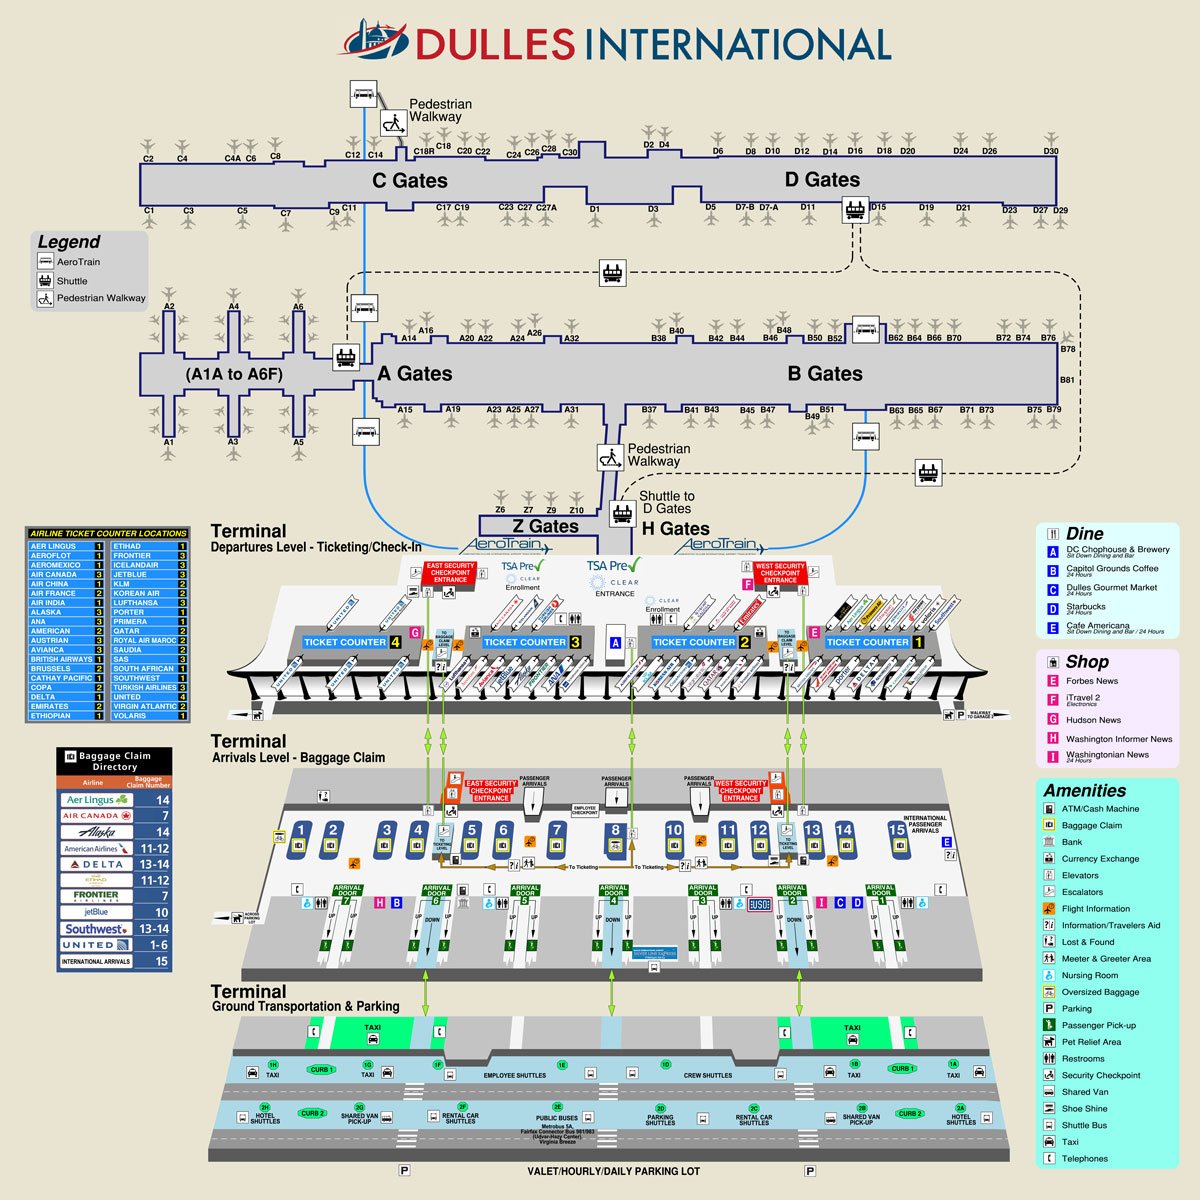 Dulles Airport Terminals and Concourses